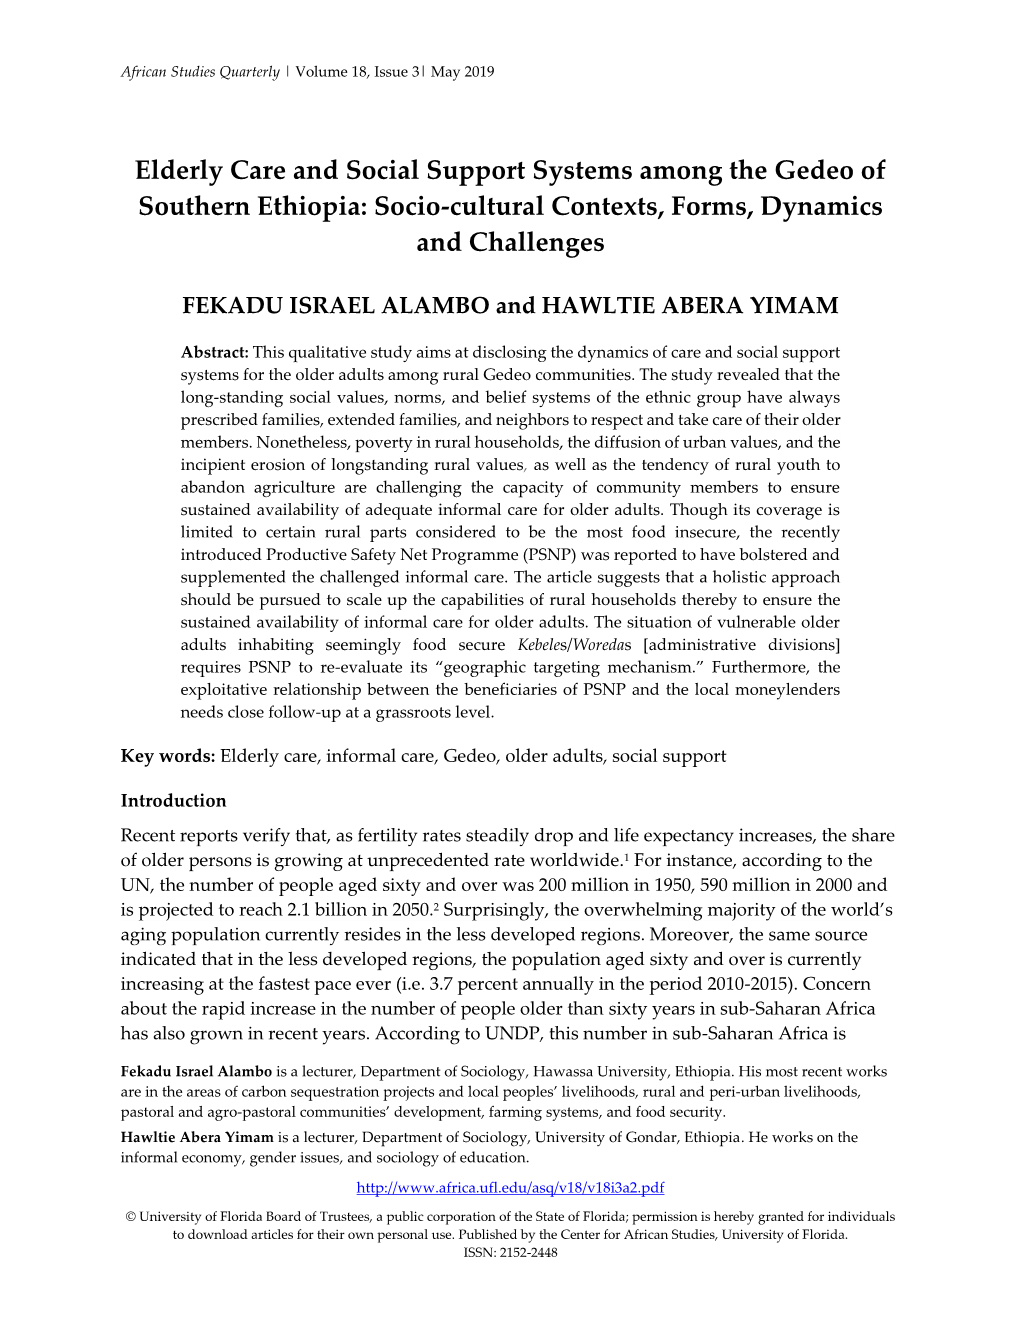 Elderly Care and Social Support Systems Among the Gedeo of Southern Ethiopia: Socio-Cultural Contexts, Forms, Dynamics and Challenges